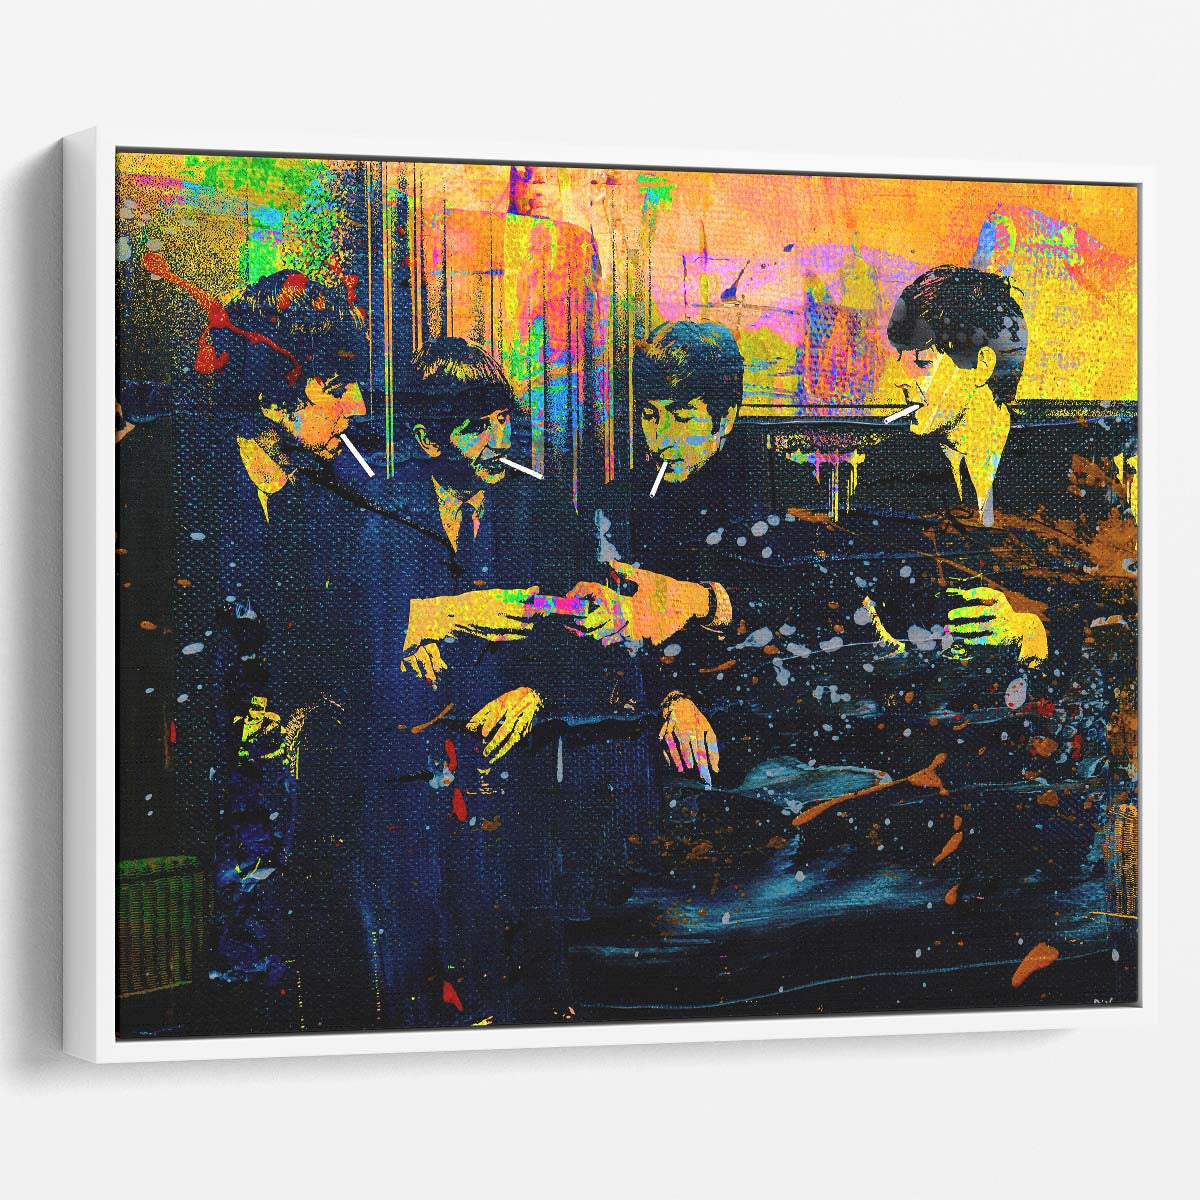 Smoking Beatles Graffiti Wall Art by Luxuriance Designs. Made in USA.